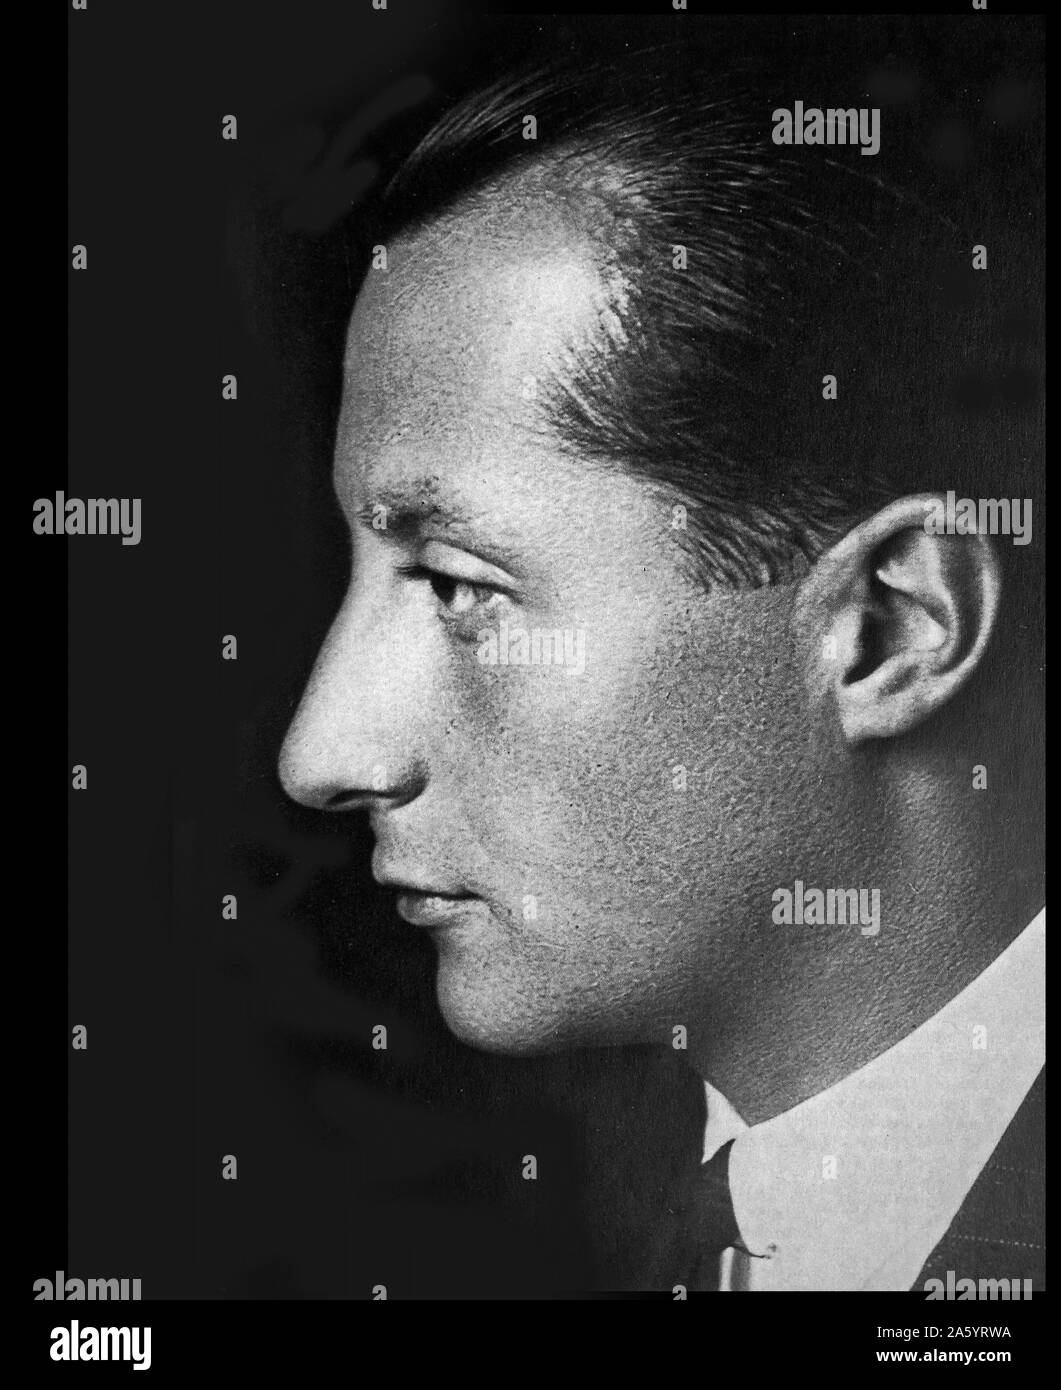 Don José Antonio Primo de Rivera y Sáenz de Heredia, 1st Duke of Primo de Rivera, 3rd Marquis of Estella, Grandee of Spain (April 24, 1903 – November 20, 1936) was a Spanish lawyer, nobleman, politician, and founder of the Falange Española ('Spanish Phalanx'). He was executed by the Spanish republican government during the course of the Spanish Civil War. Stock Photo